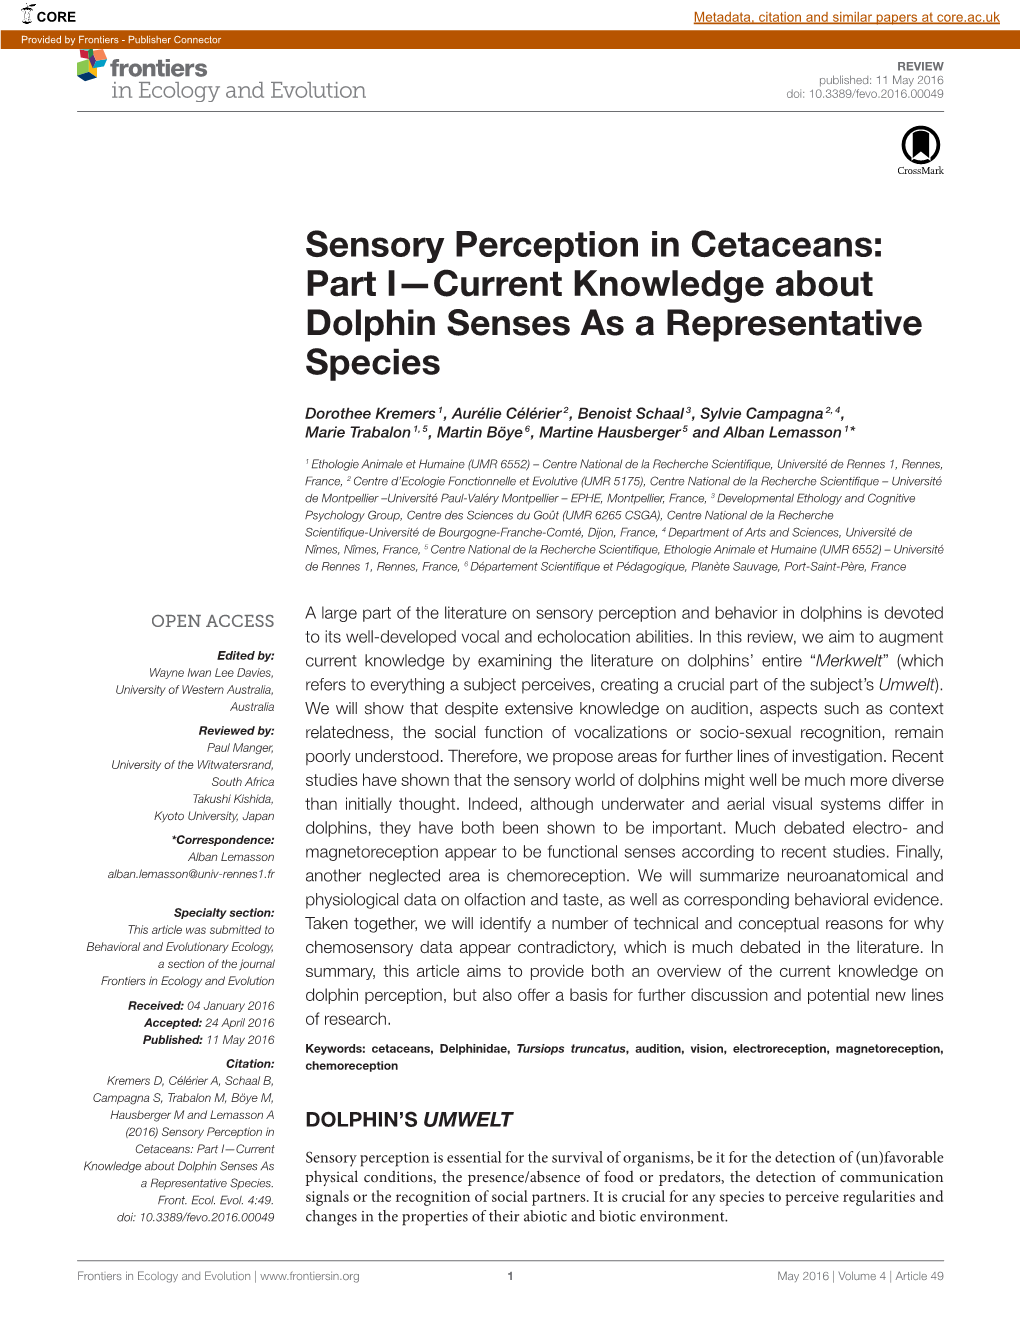 Sensory Perception in Cetaceans: Part I—Current Knowledge About Dolphin Senses As a Representative Species